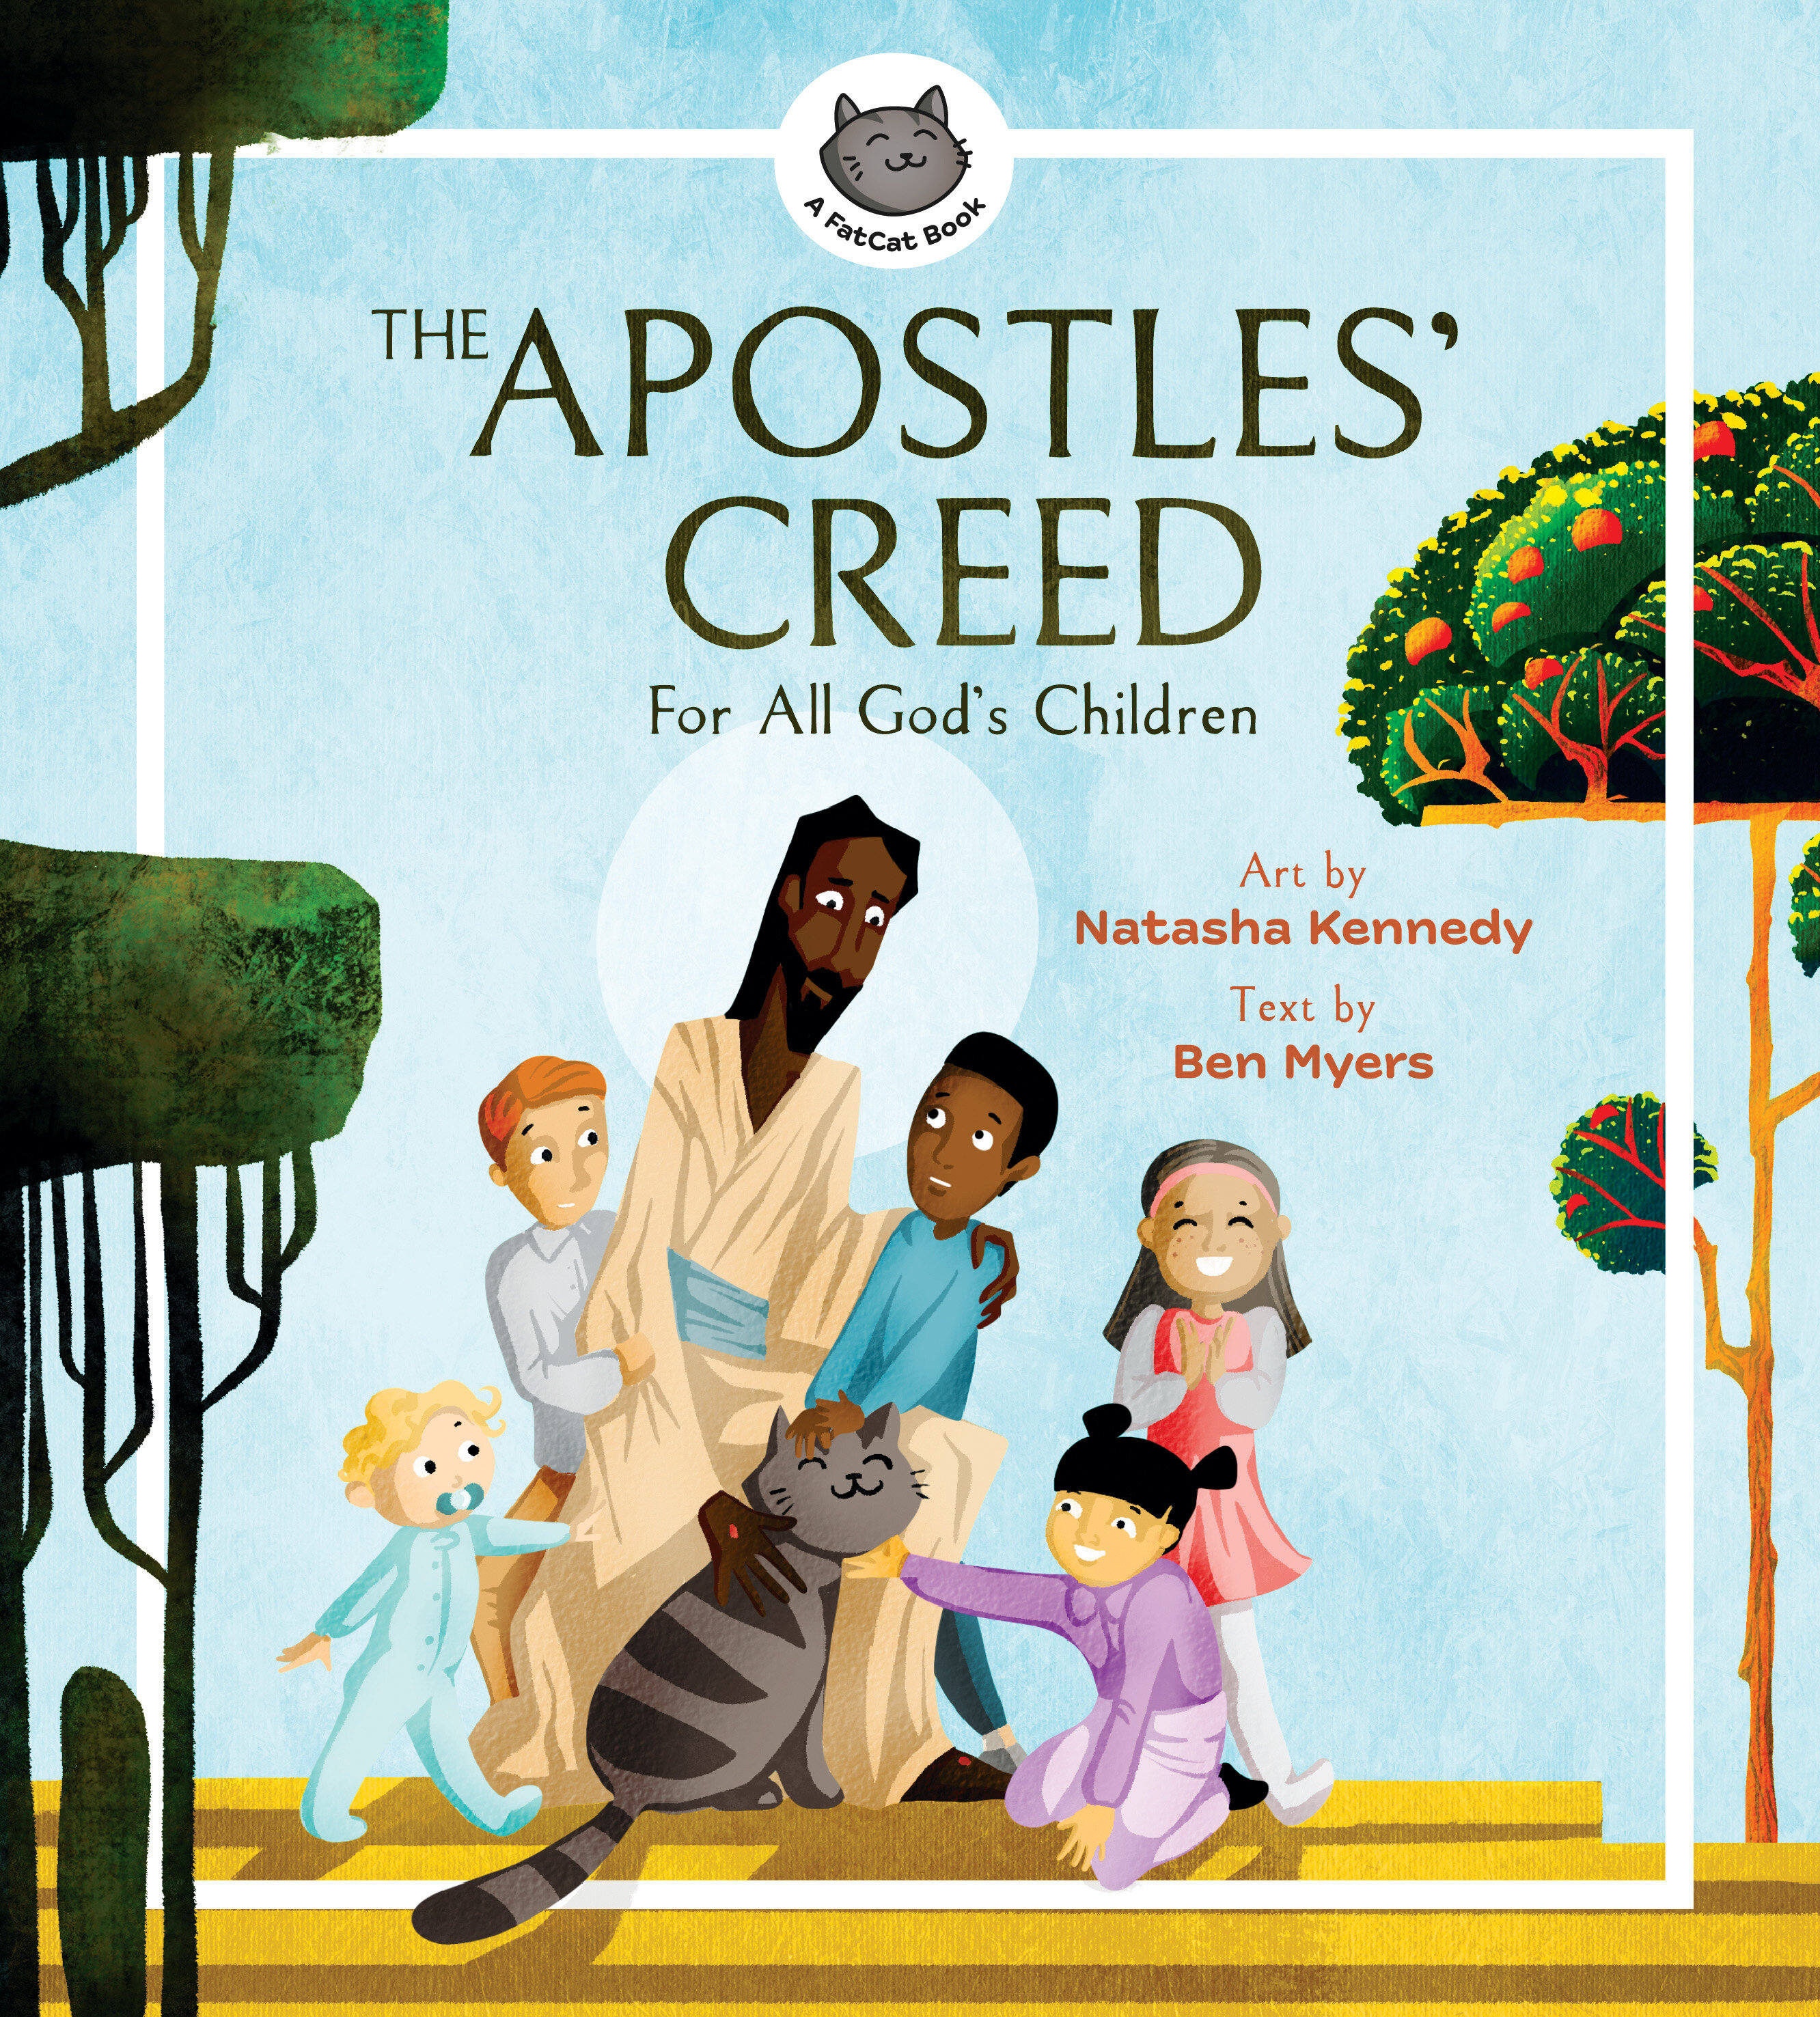 The Apostles’ Creed: For All God’s Children (A FatCat Book)